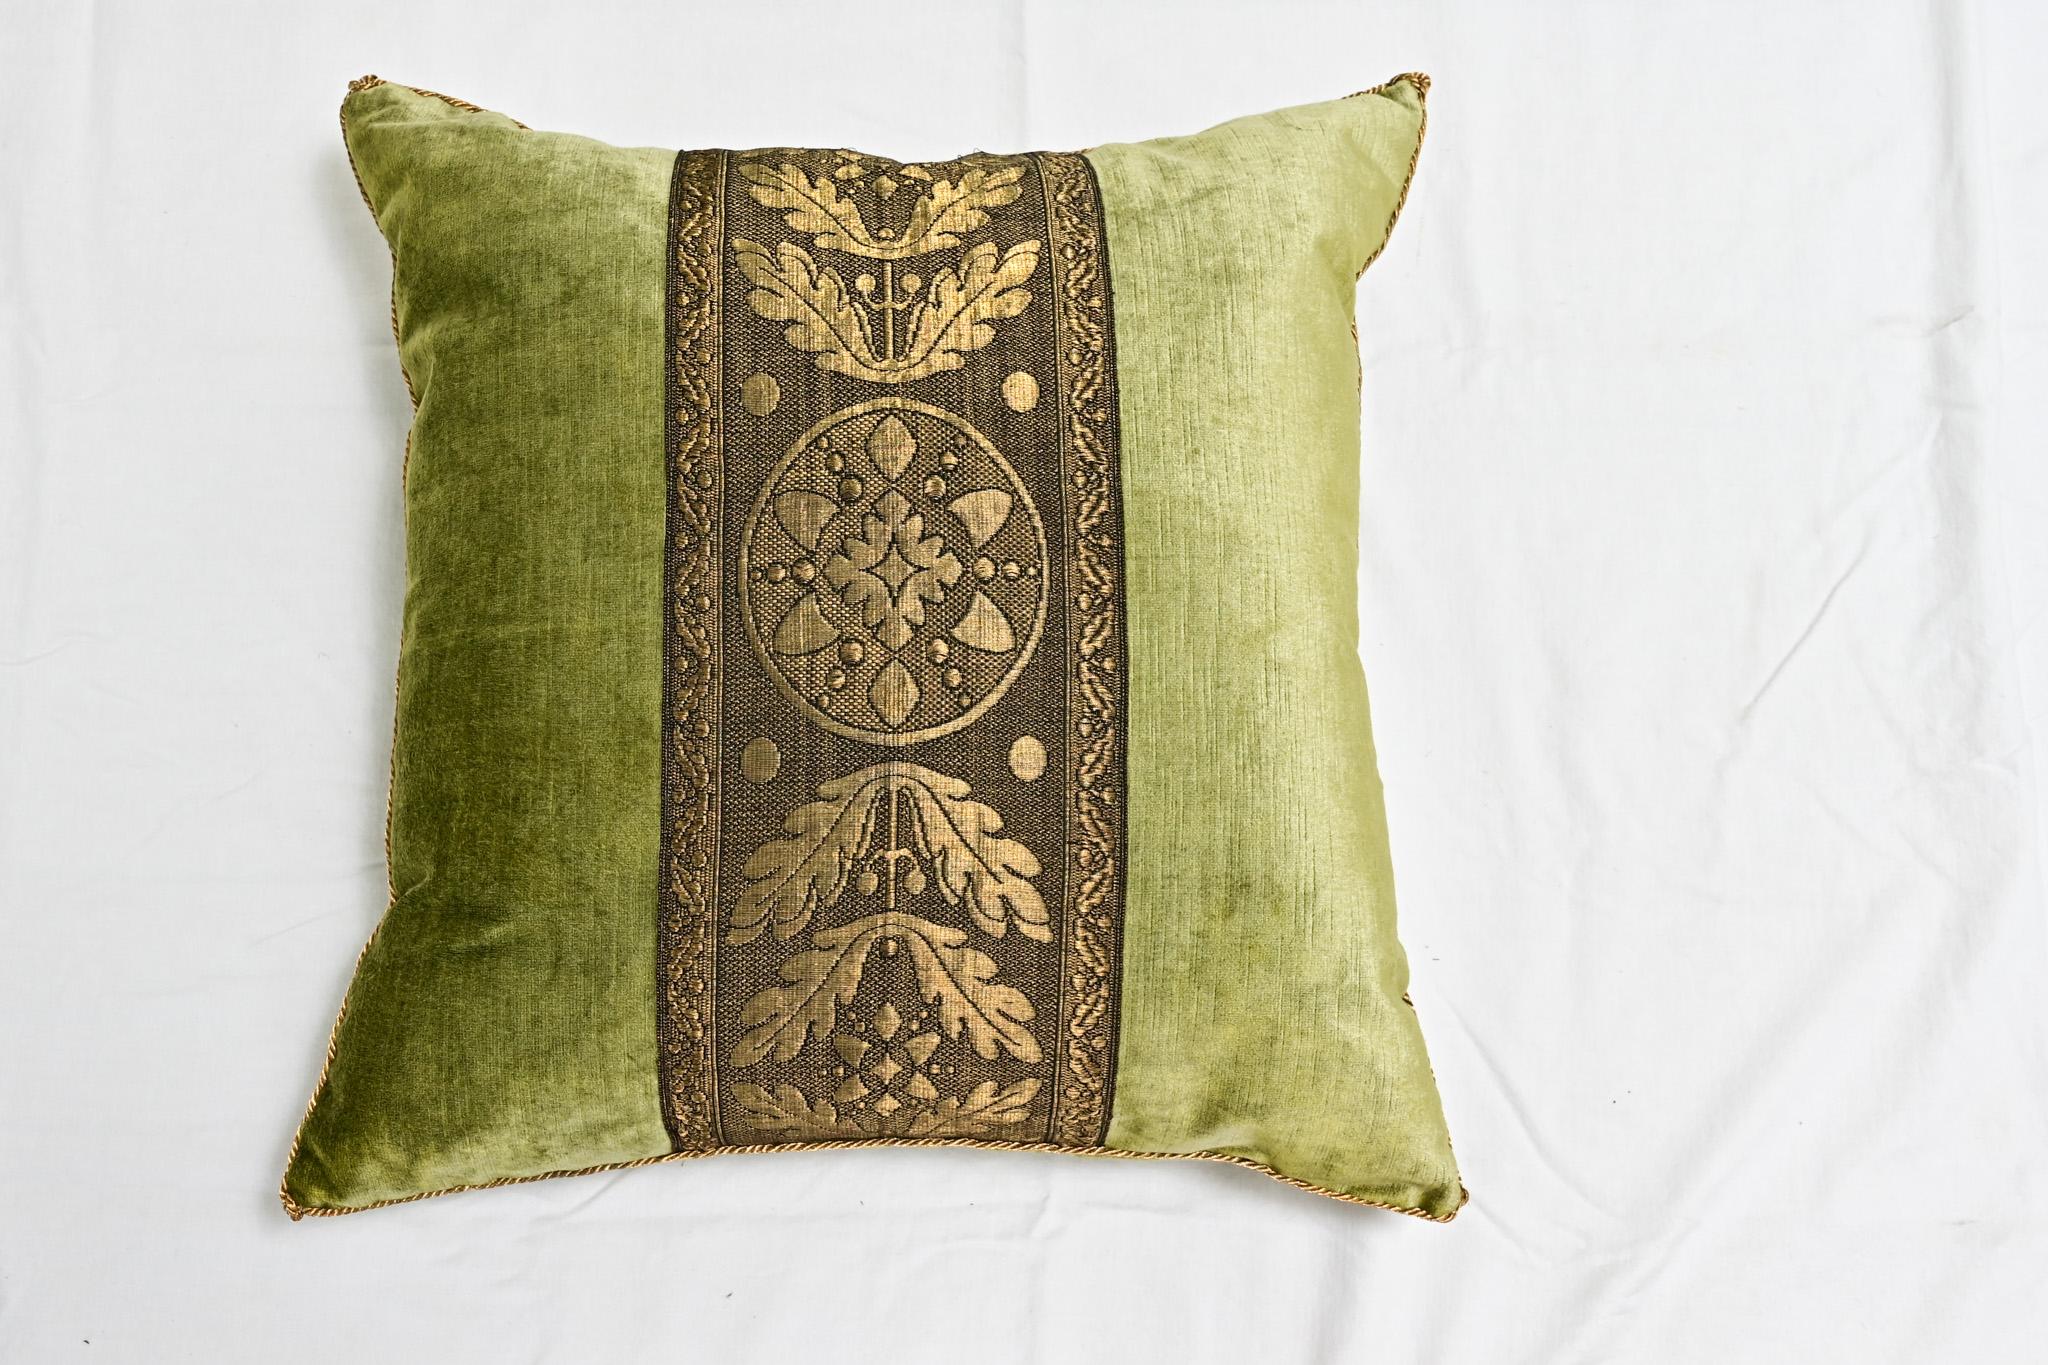 A single pillow made from a beautiful chartreuse velvet. Hand trimmed with vintage gold metallic cording, knotted in the corners. Designed by Rebecca Vizard for B. Viz Design. This down filled pillow features an unusually wide, antique gold metallic